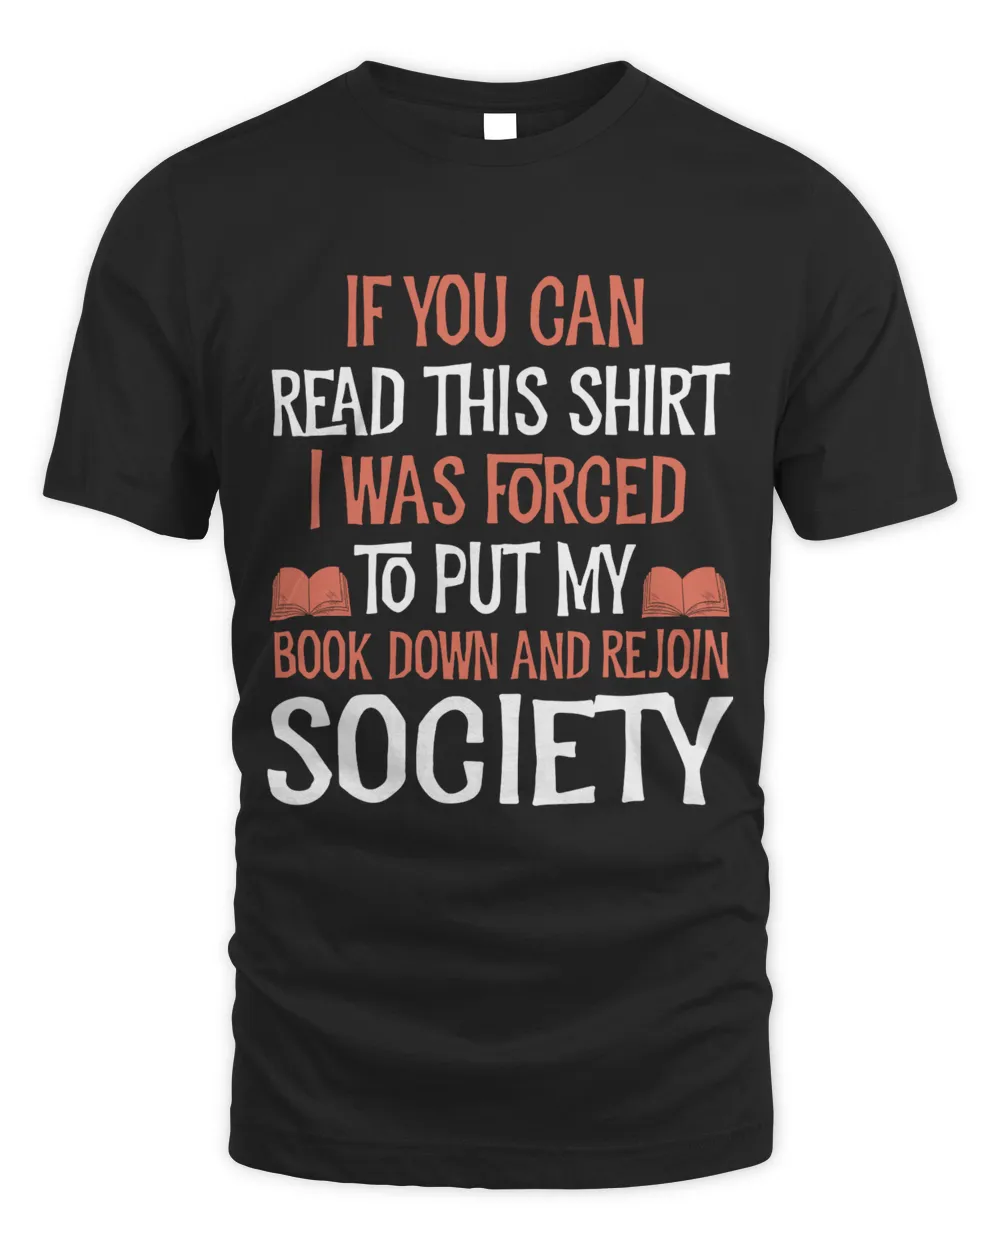 If you can read this shirt I was forced to put my book down and rejoin society